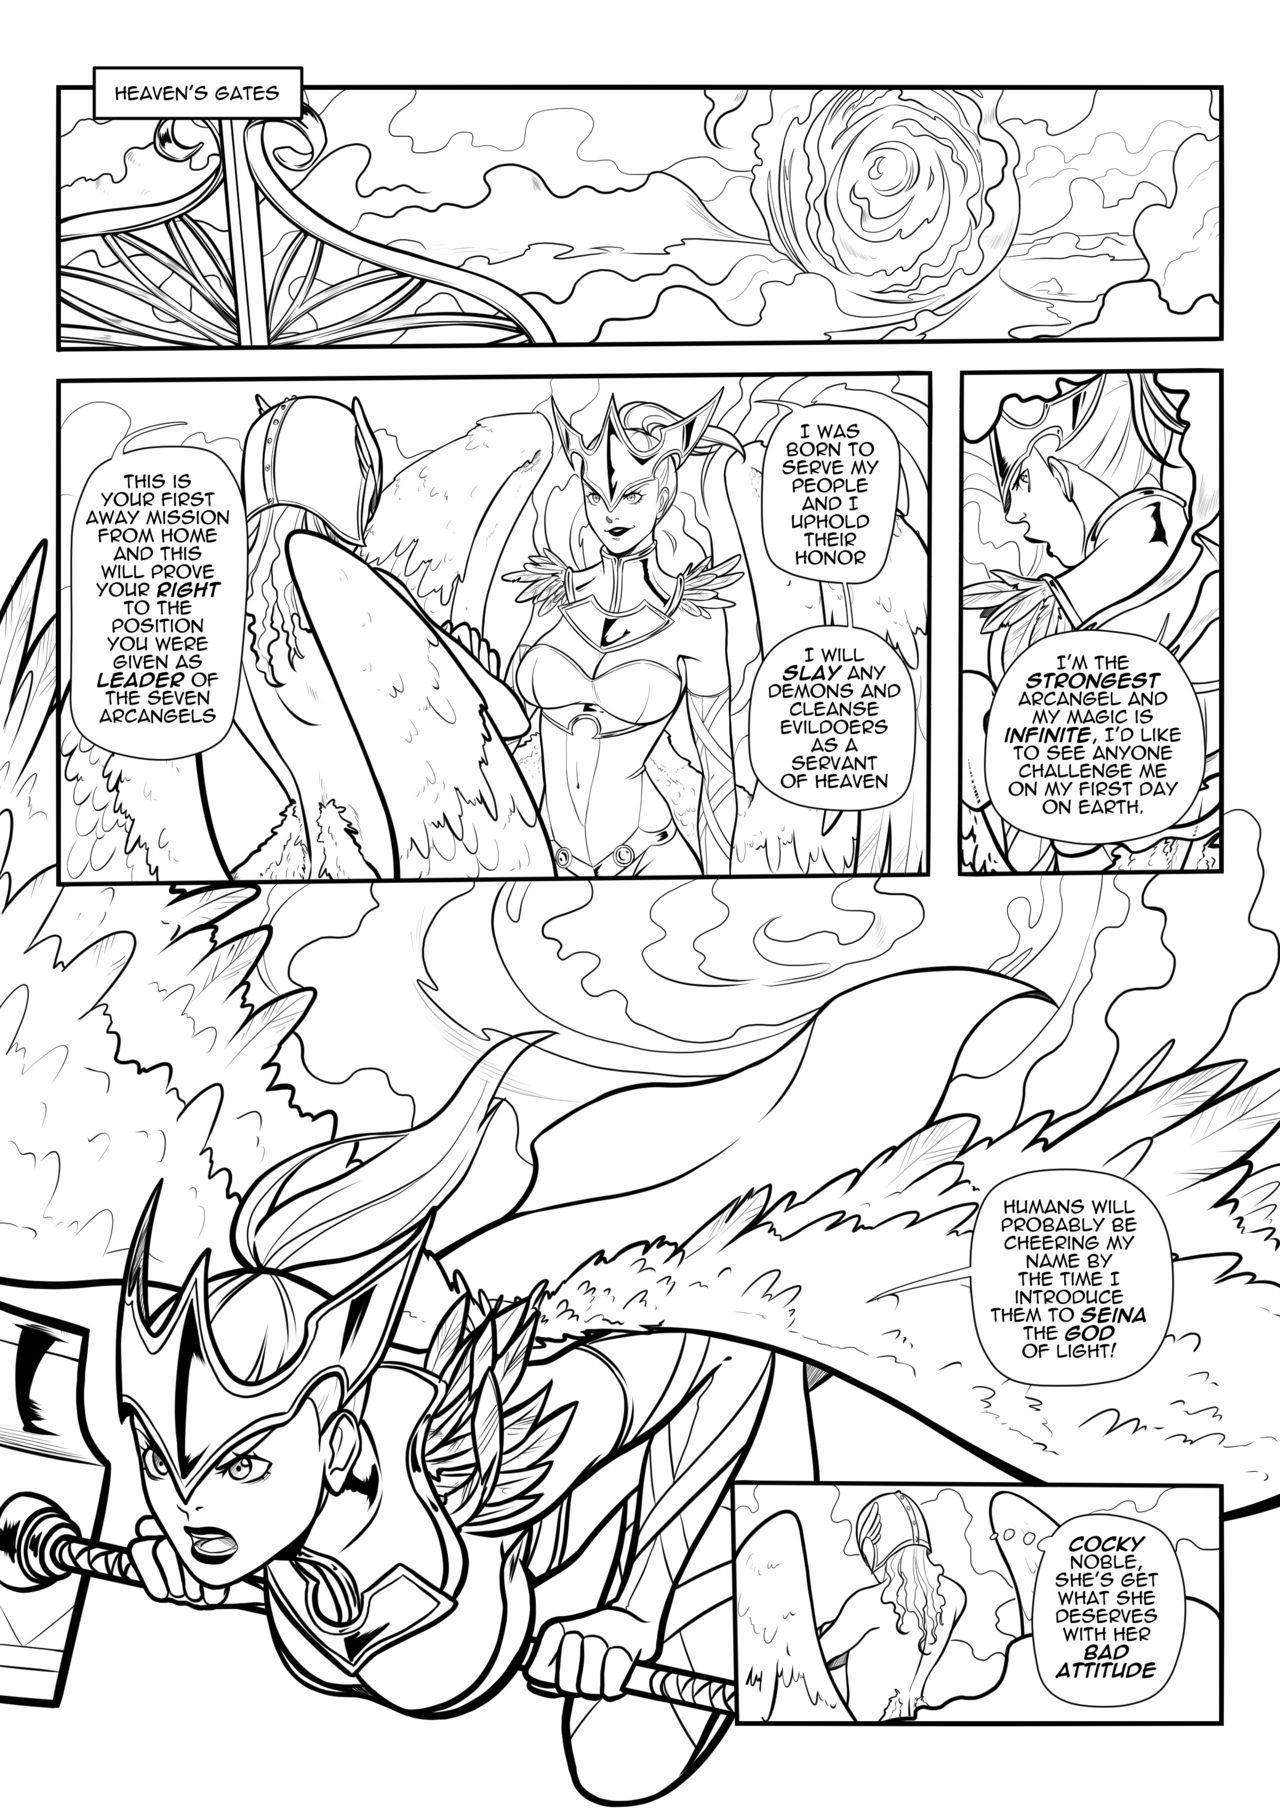 Ayana The ArchAngel [Ongoing] (Lady Valiant Spin-off story) 3